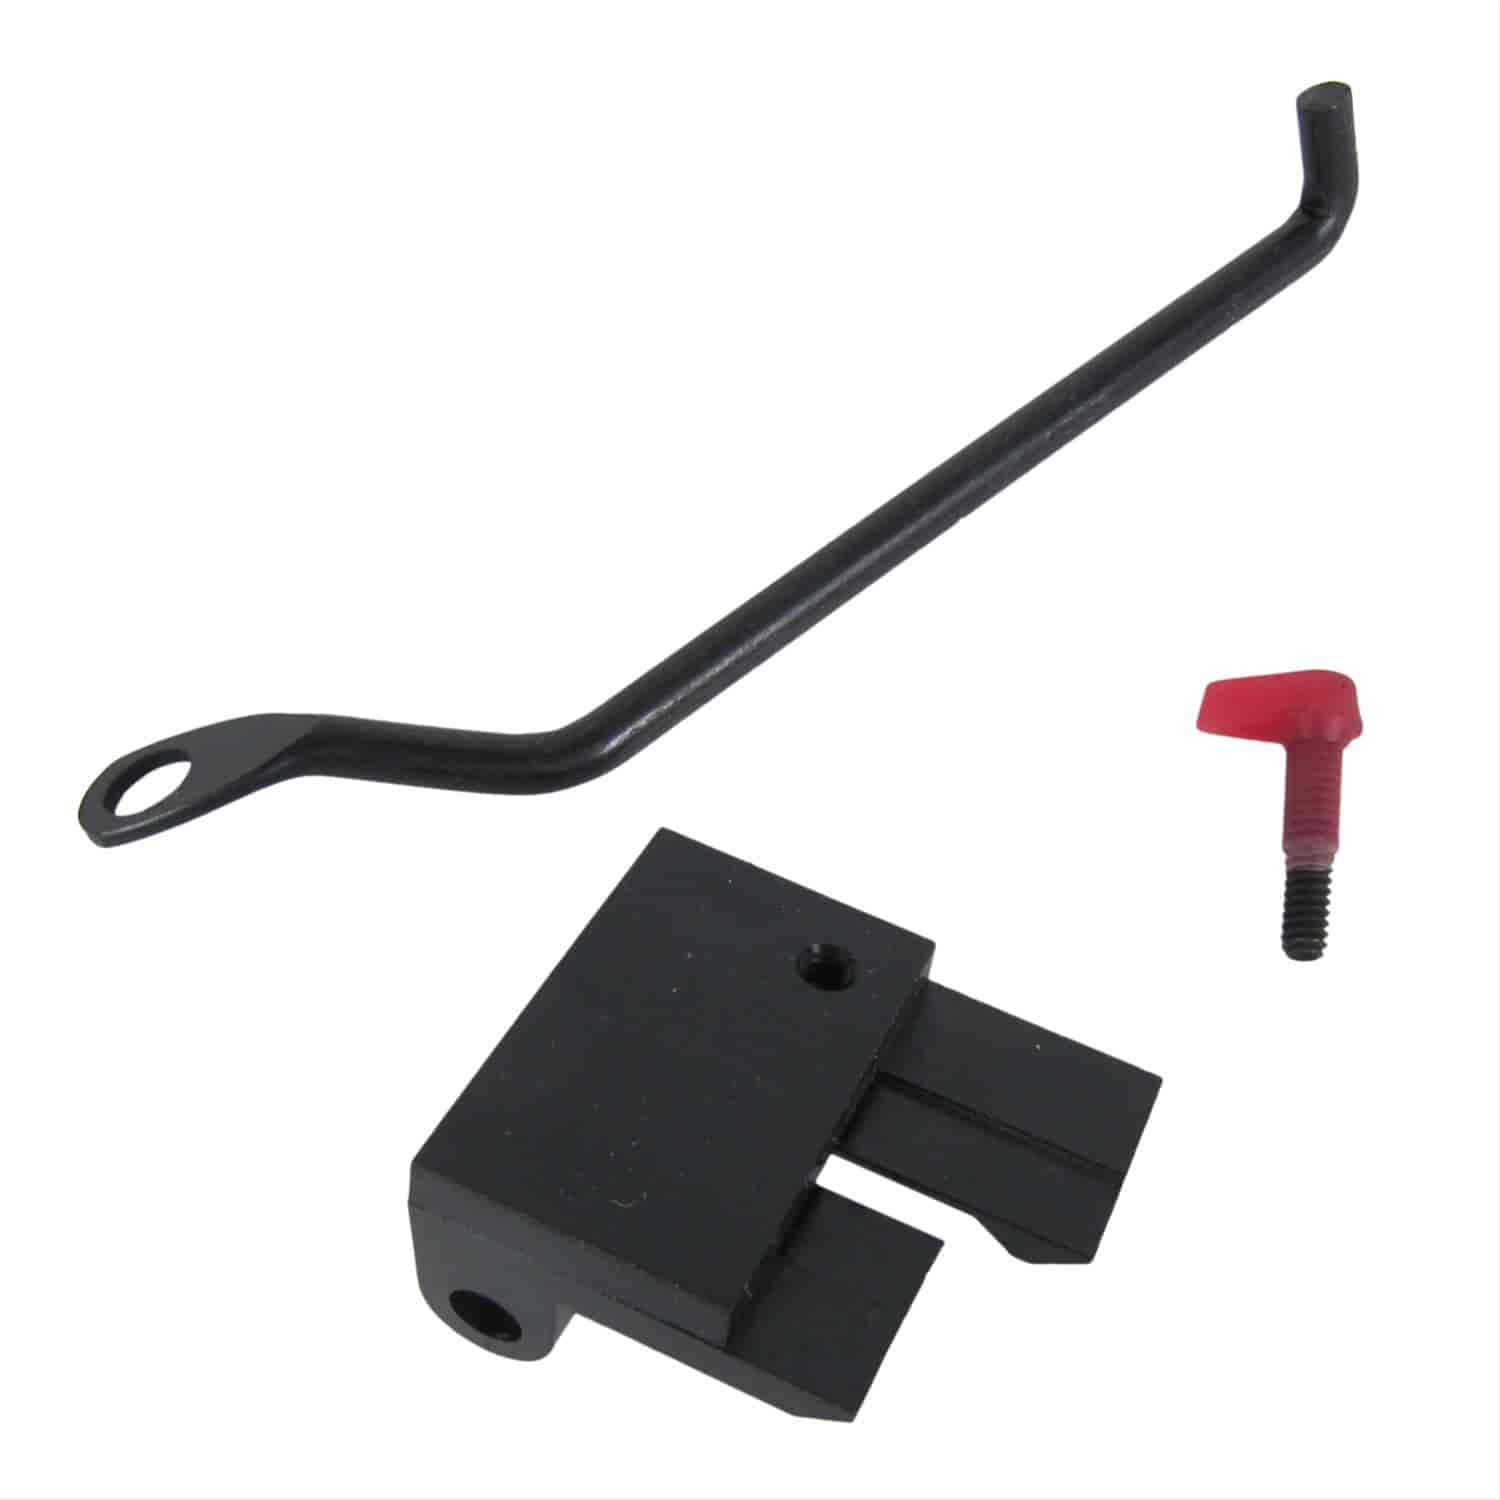 Replacement Shifter Indicator Cable/Pointer For Use With StarShifter 130-80675 and Pro Ratchet 130-80840 & 130-80842